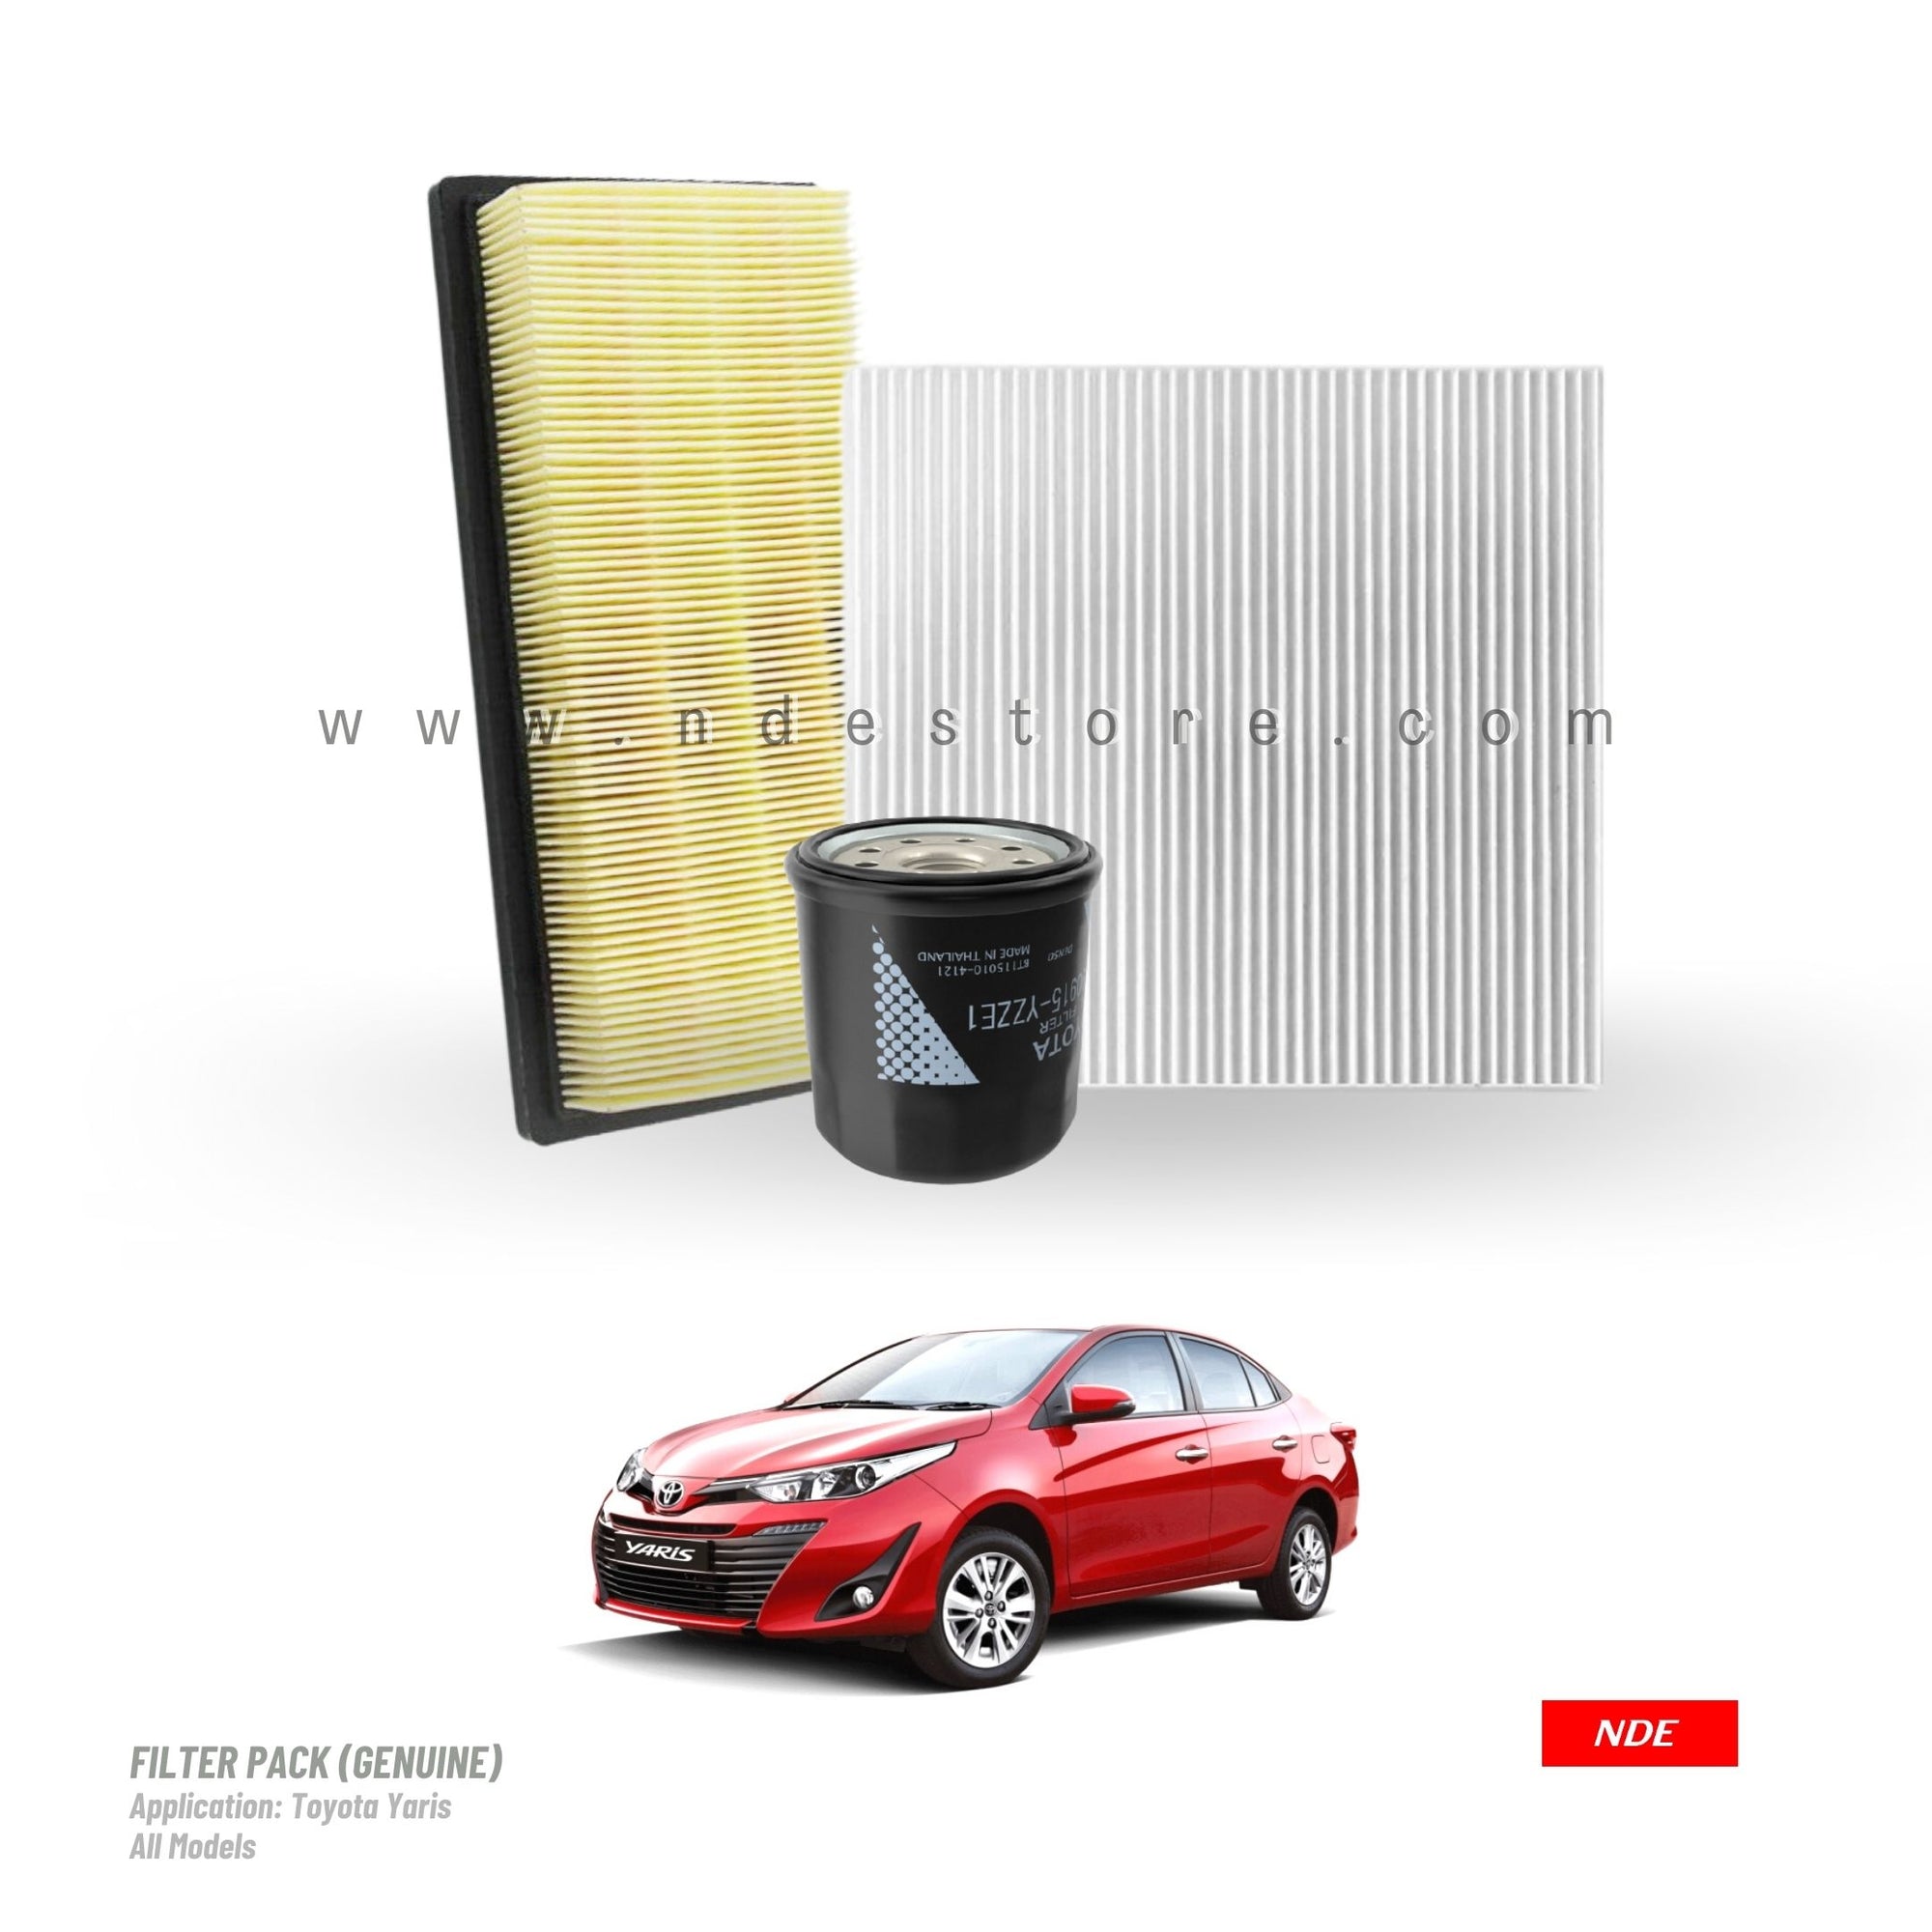 ESSENTIAL FILTER PACK GENUINE FOR TOYOTA YARIS